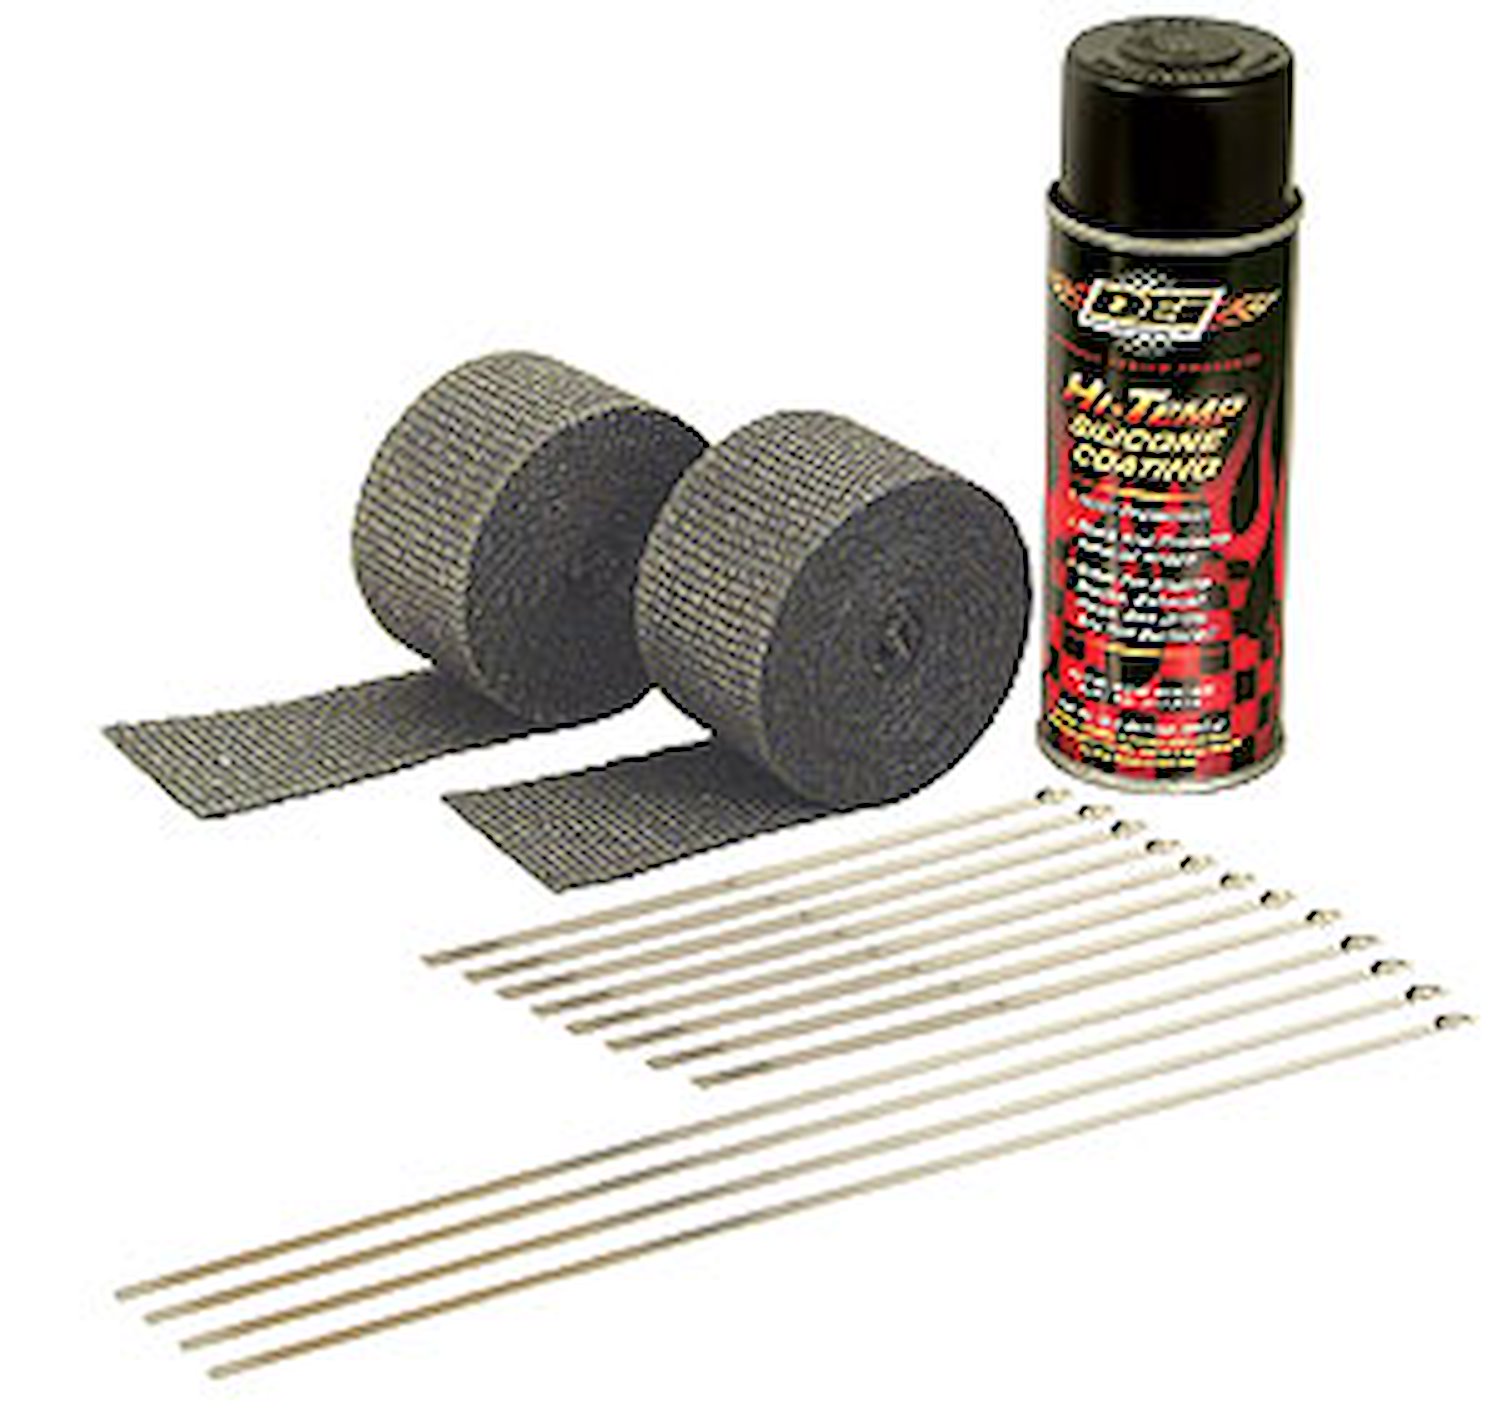 Motorcycle Exhaust Pipe Wrap Kit With Black HT Silicone Coating